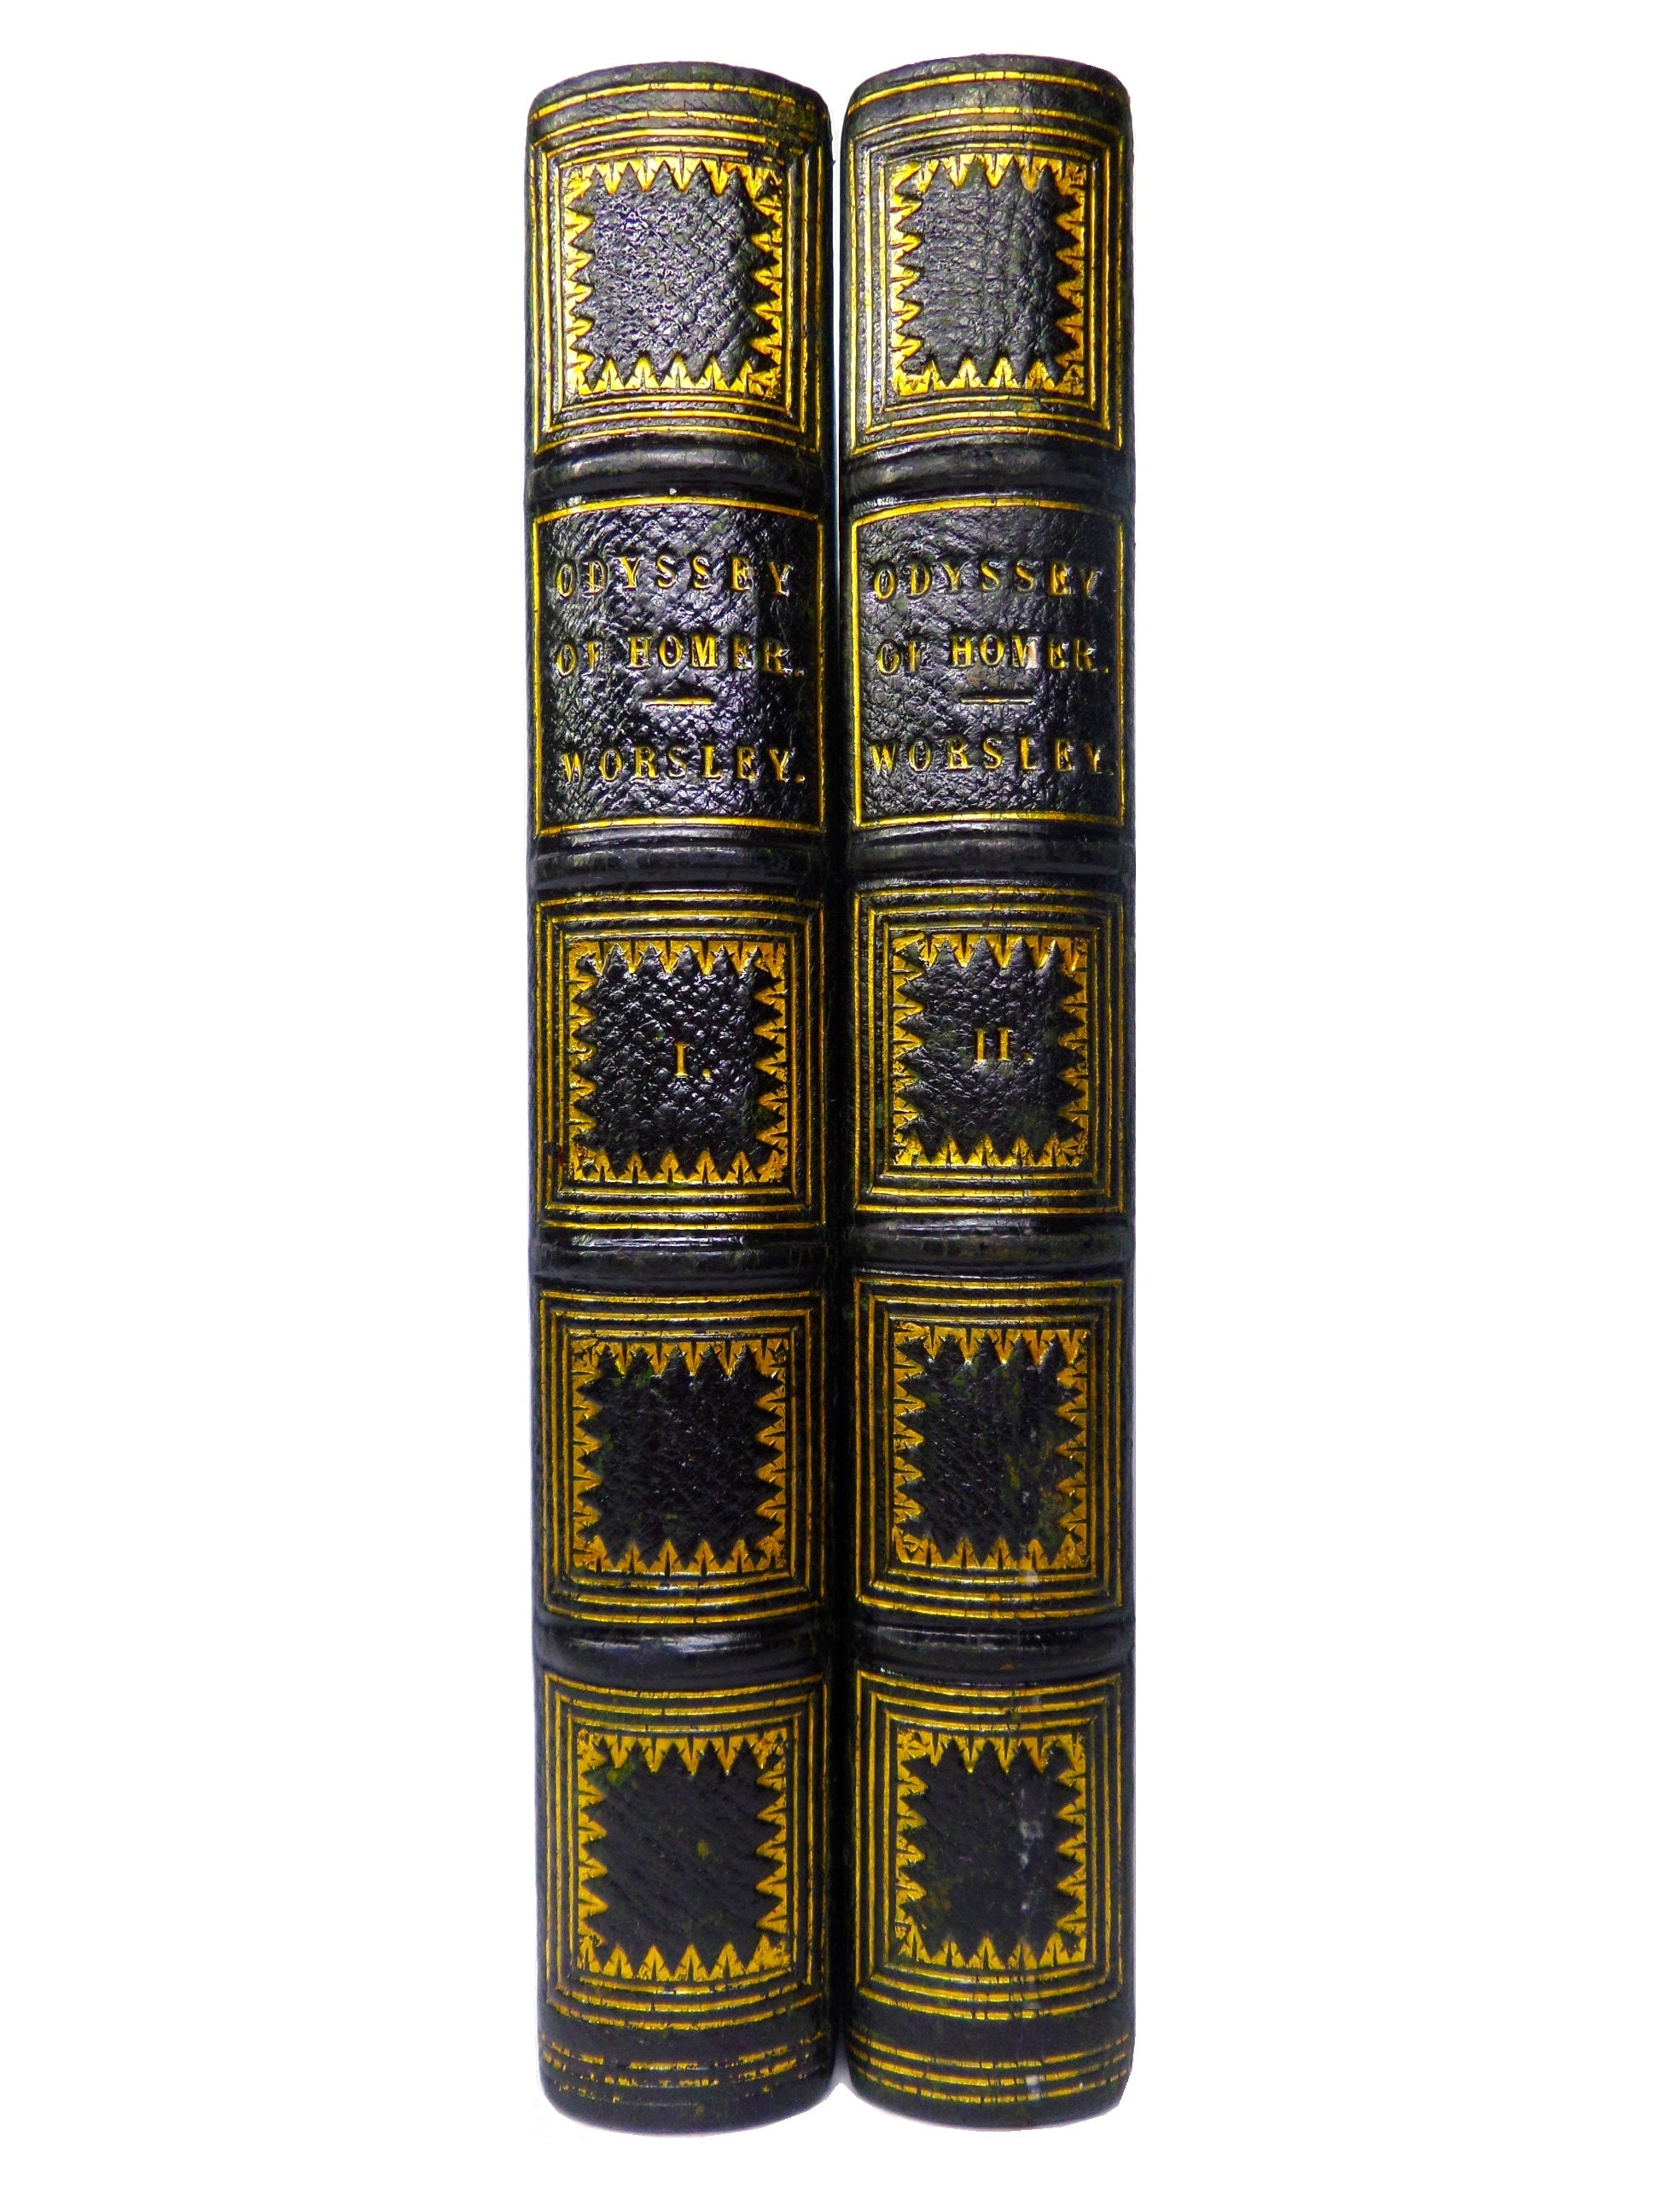 THE ODYSSEY OF HOMER 1861 FINE LEATHER BINDINGS